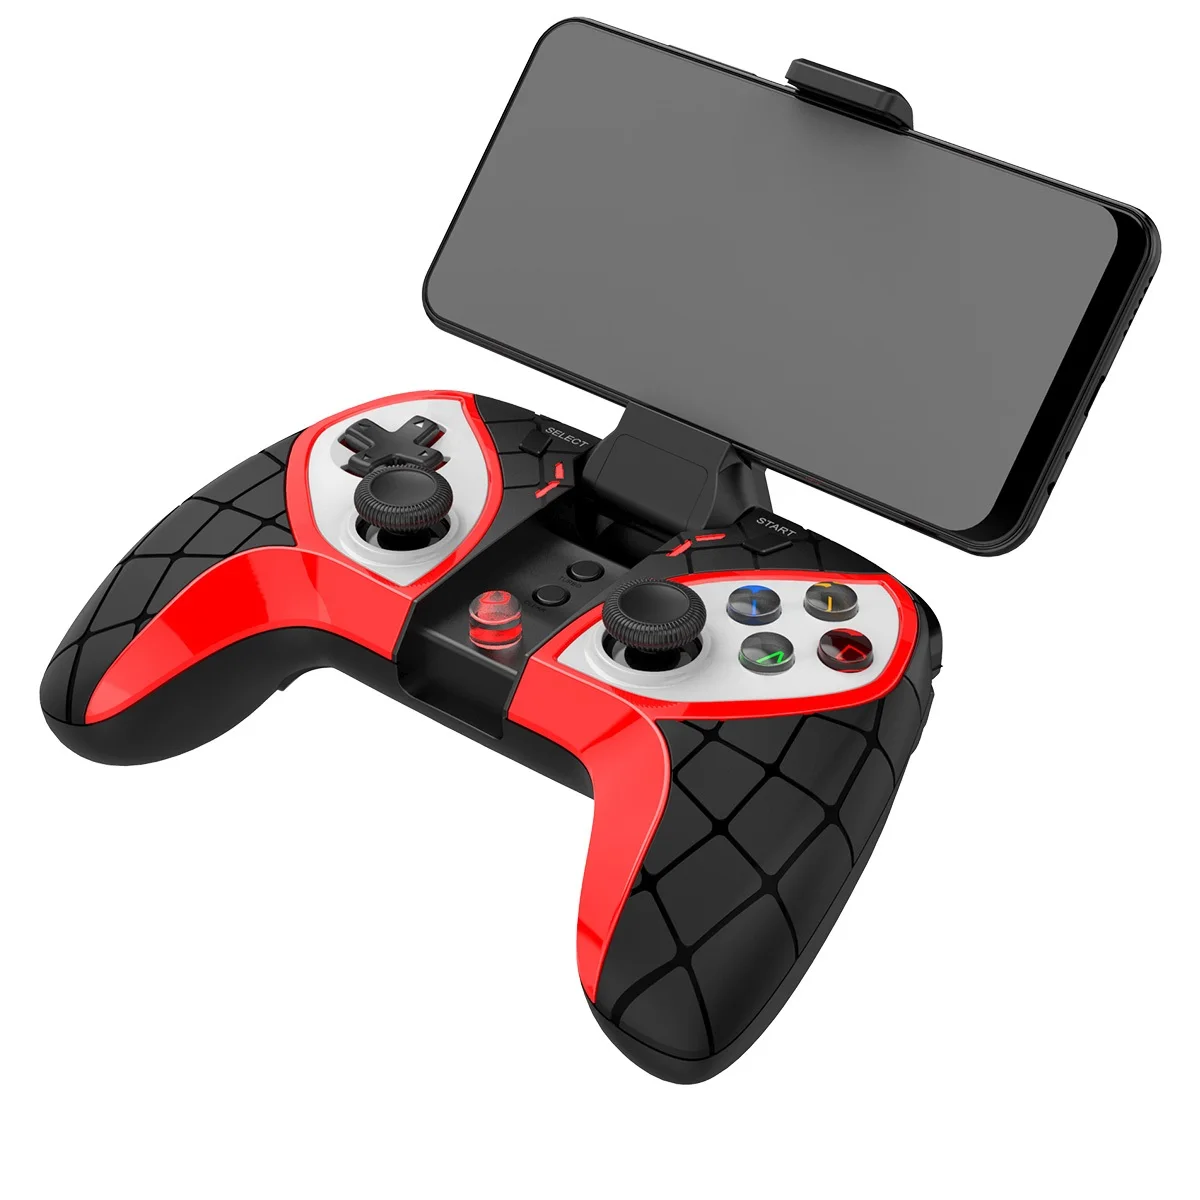 

Ipega PG-9210 Wireless Joystick Mobile Gaming Controller support playing PUBG Gamepad for Android/iOS, Black